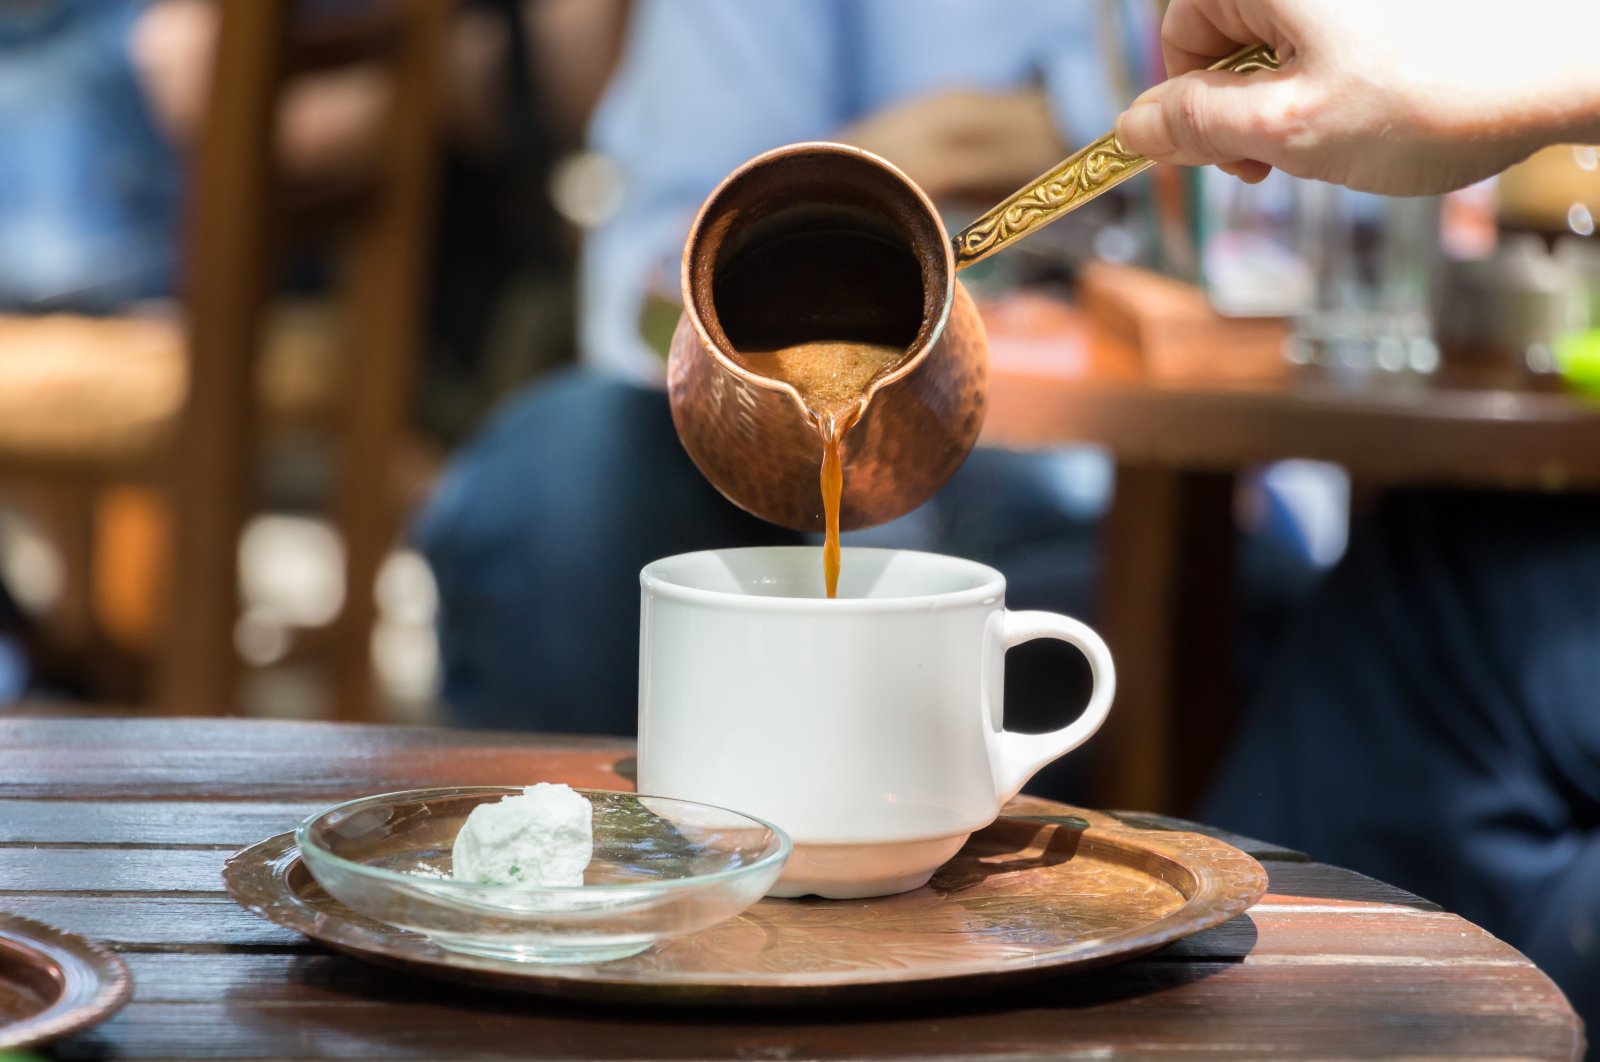 The Turkish saying, &quot;The memory of a cup of coffee lasts 40 years,&quot; was most certainly referring to the special effects of world-famous Turkish coffee. (Shutterstock Photo)